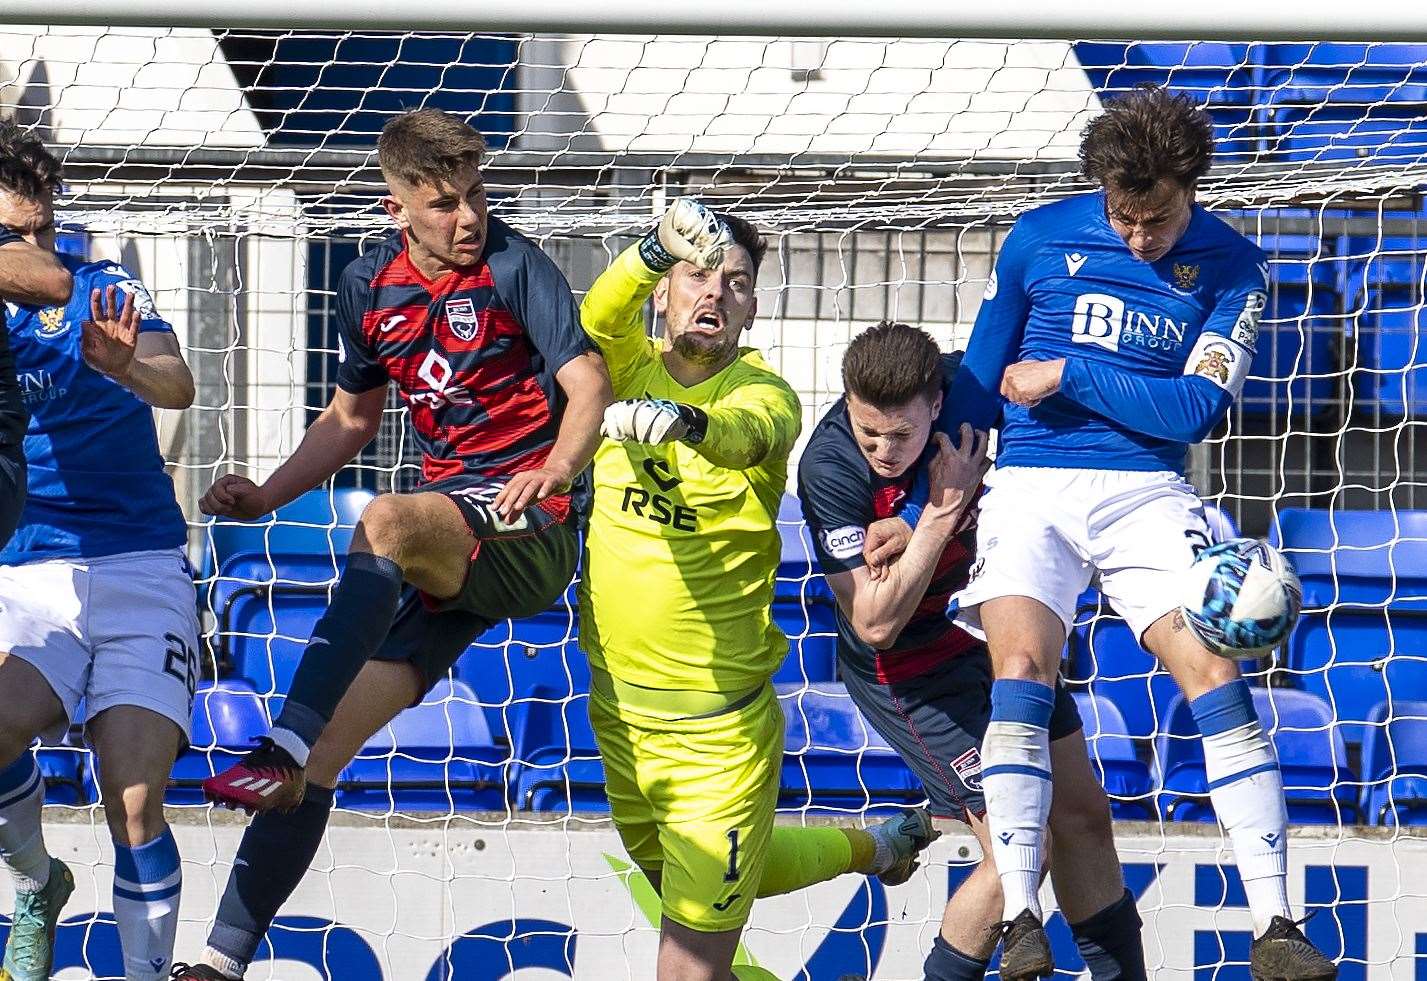 Malky Mackay ‘devastated’ for Ross County teenager Dylan Smith as former Culloden Academy pupil misses out on Under-17 European Championship campaign with Scotland